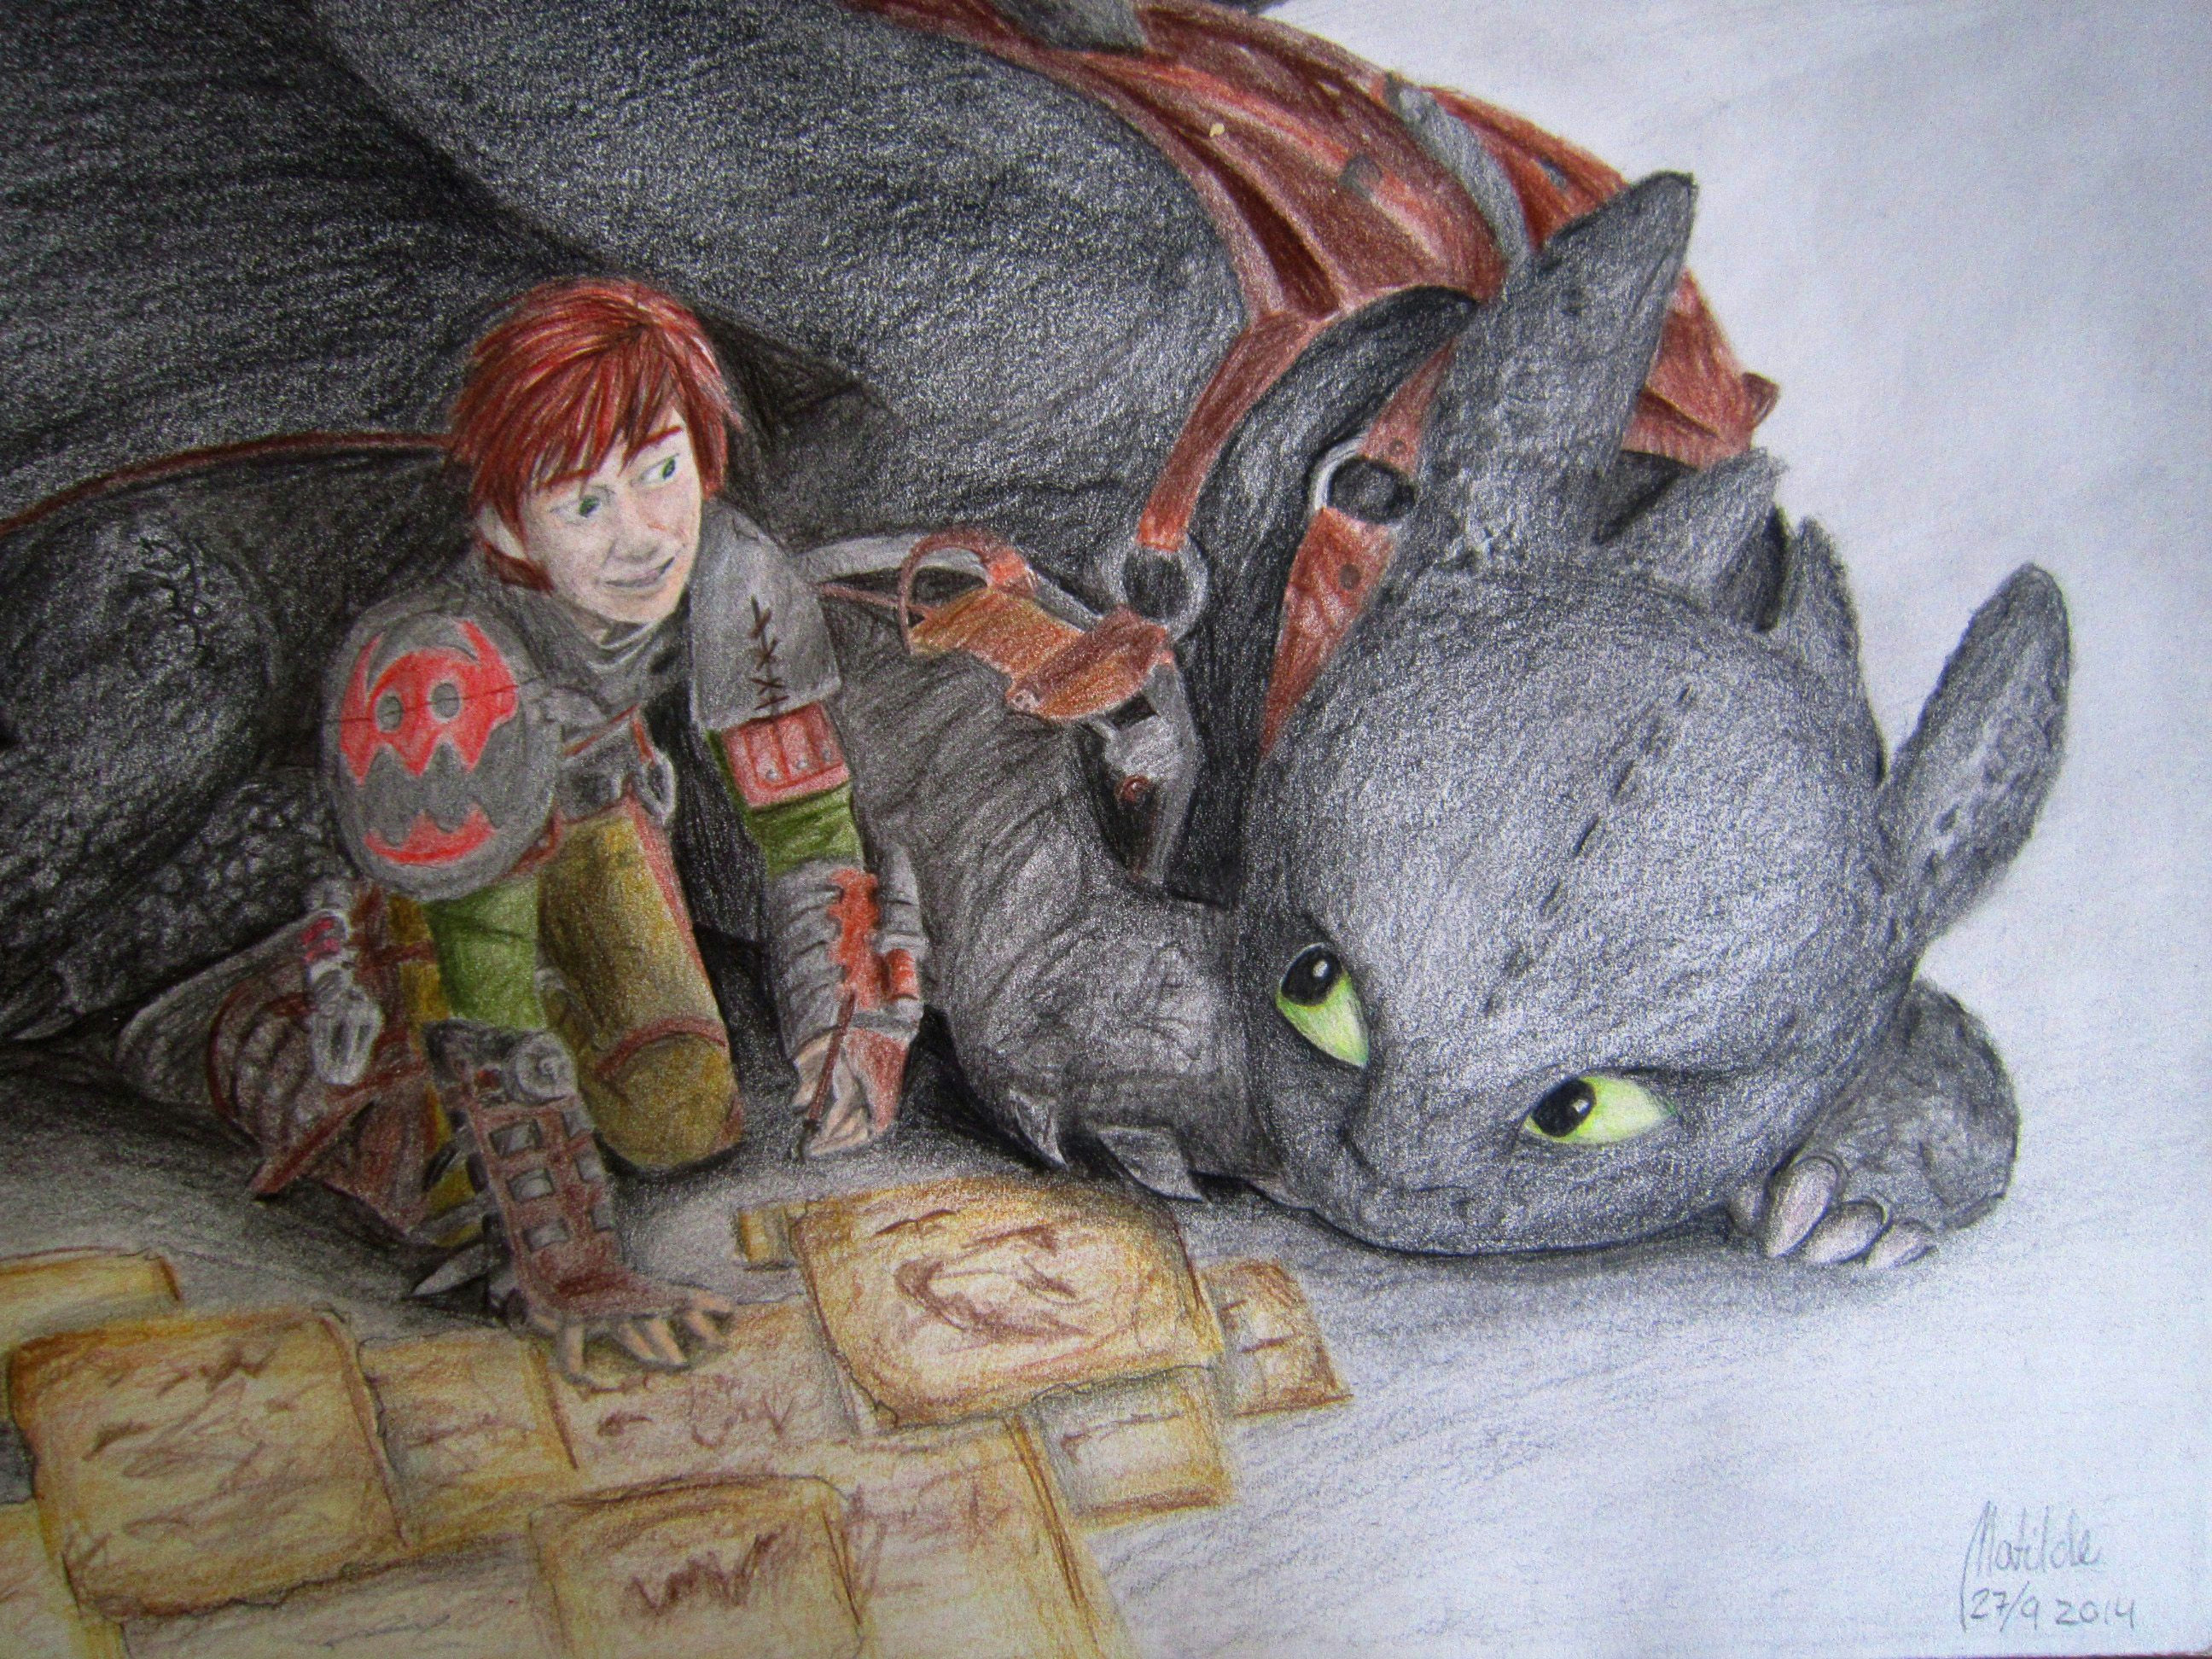 hiccup and toothless from how totrain your dragon 2 d love that movie 3